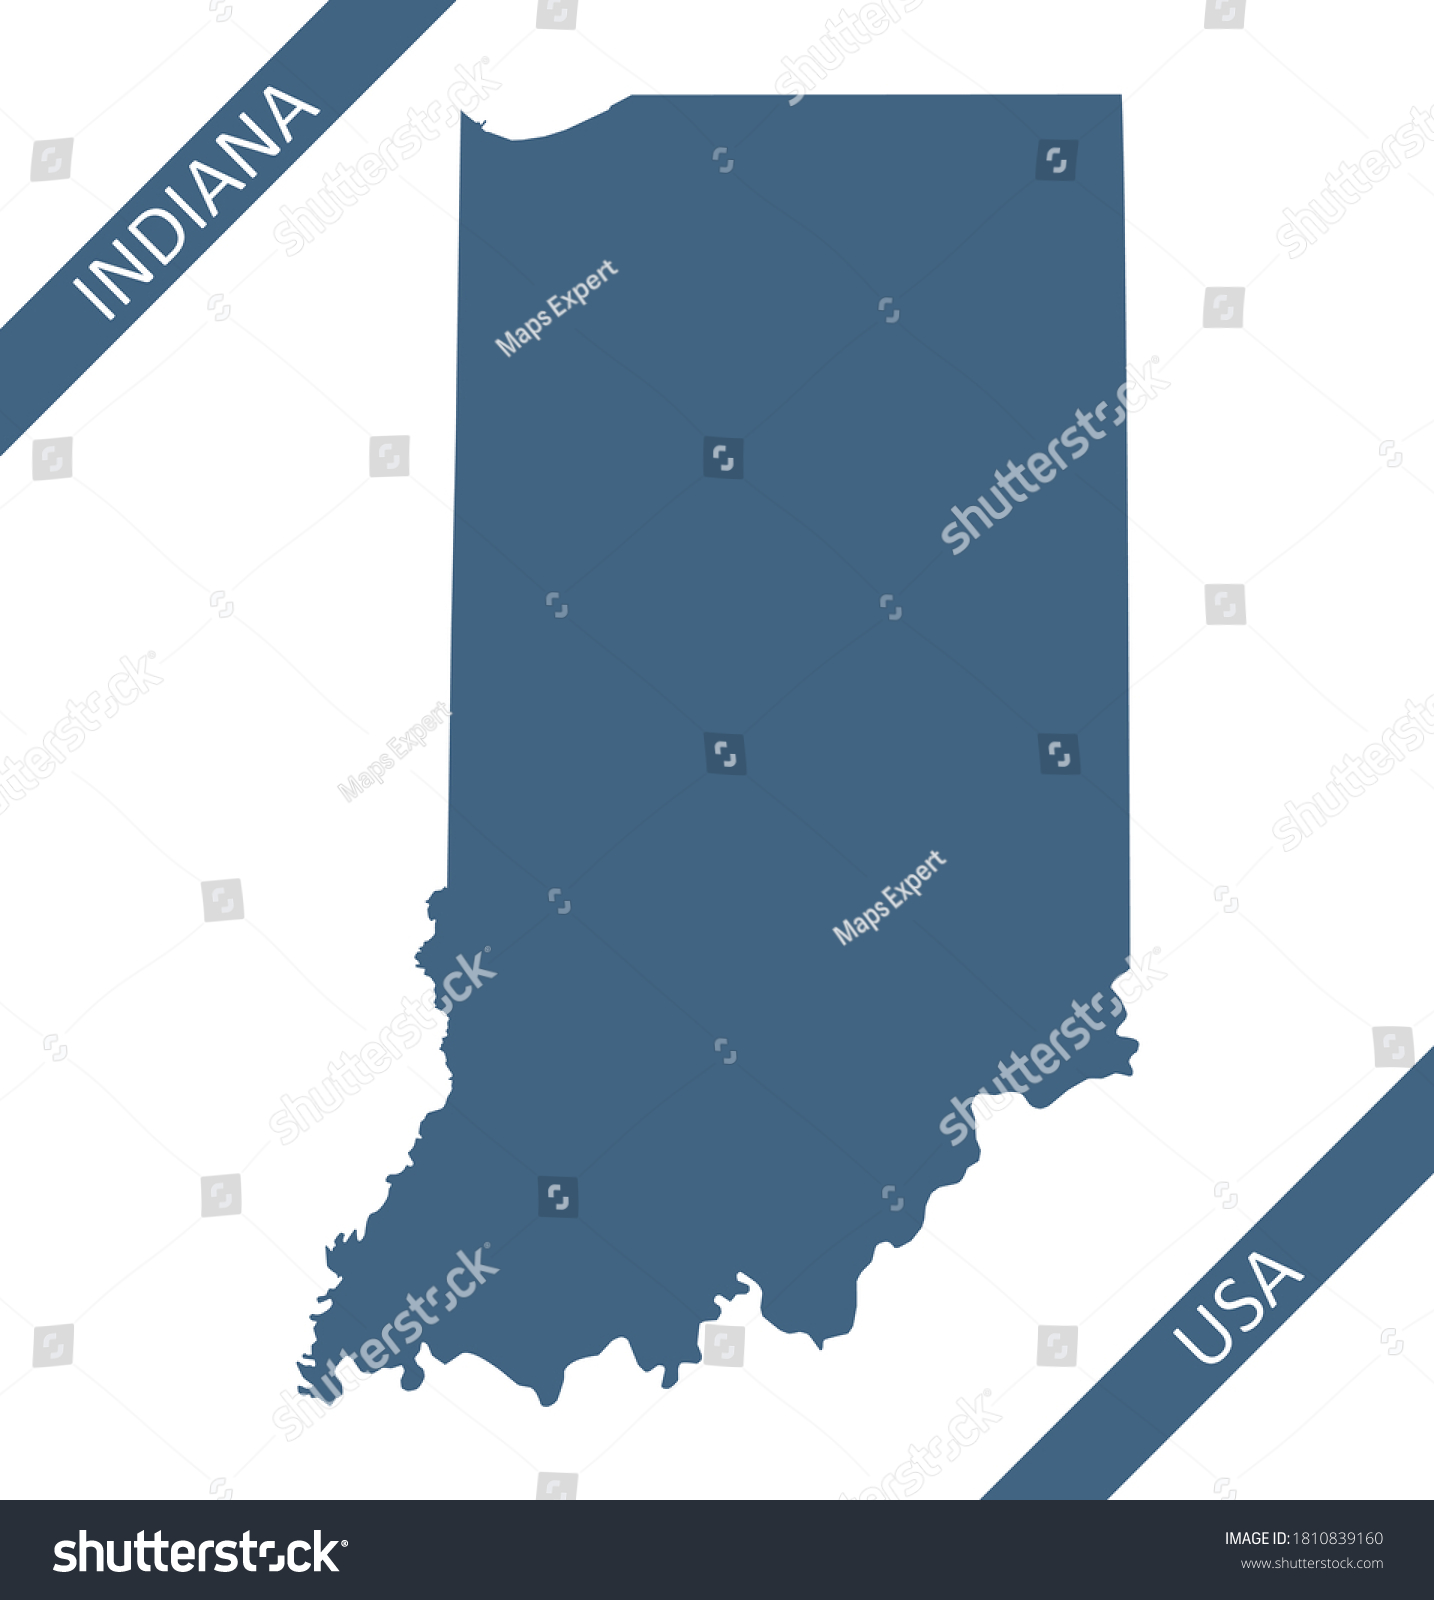 Blank map of Indiana USA #1810839160